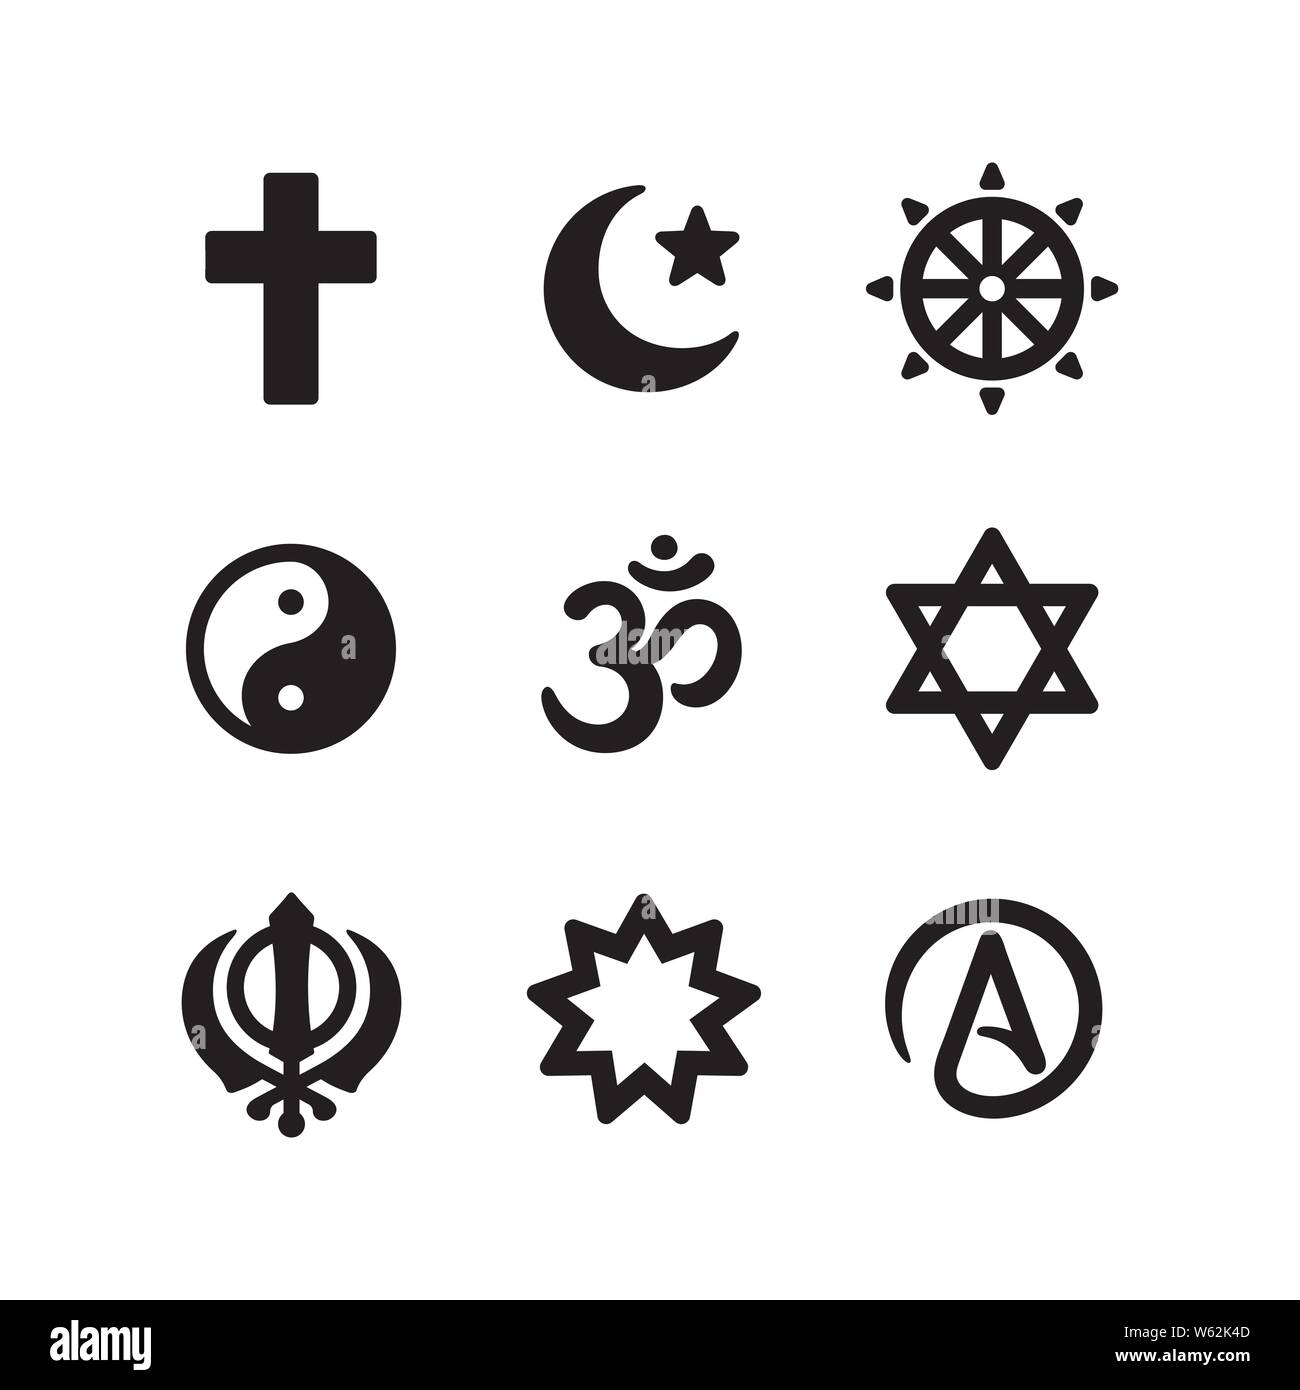 Icon set of religious symbols. Christianity, Islam, Buddhism, other main world religions and Atheism sign, simple and modern minimal style. Vector pic Stock Vector